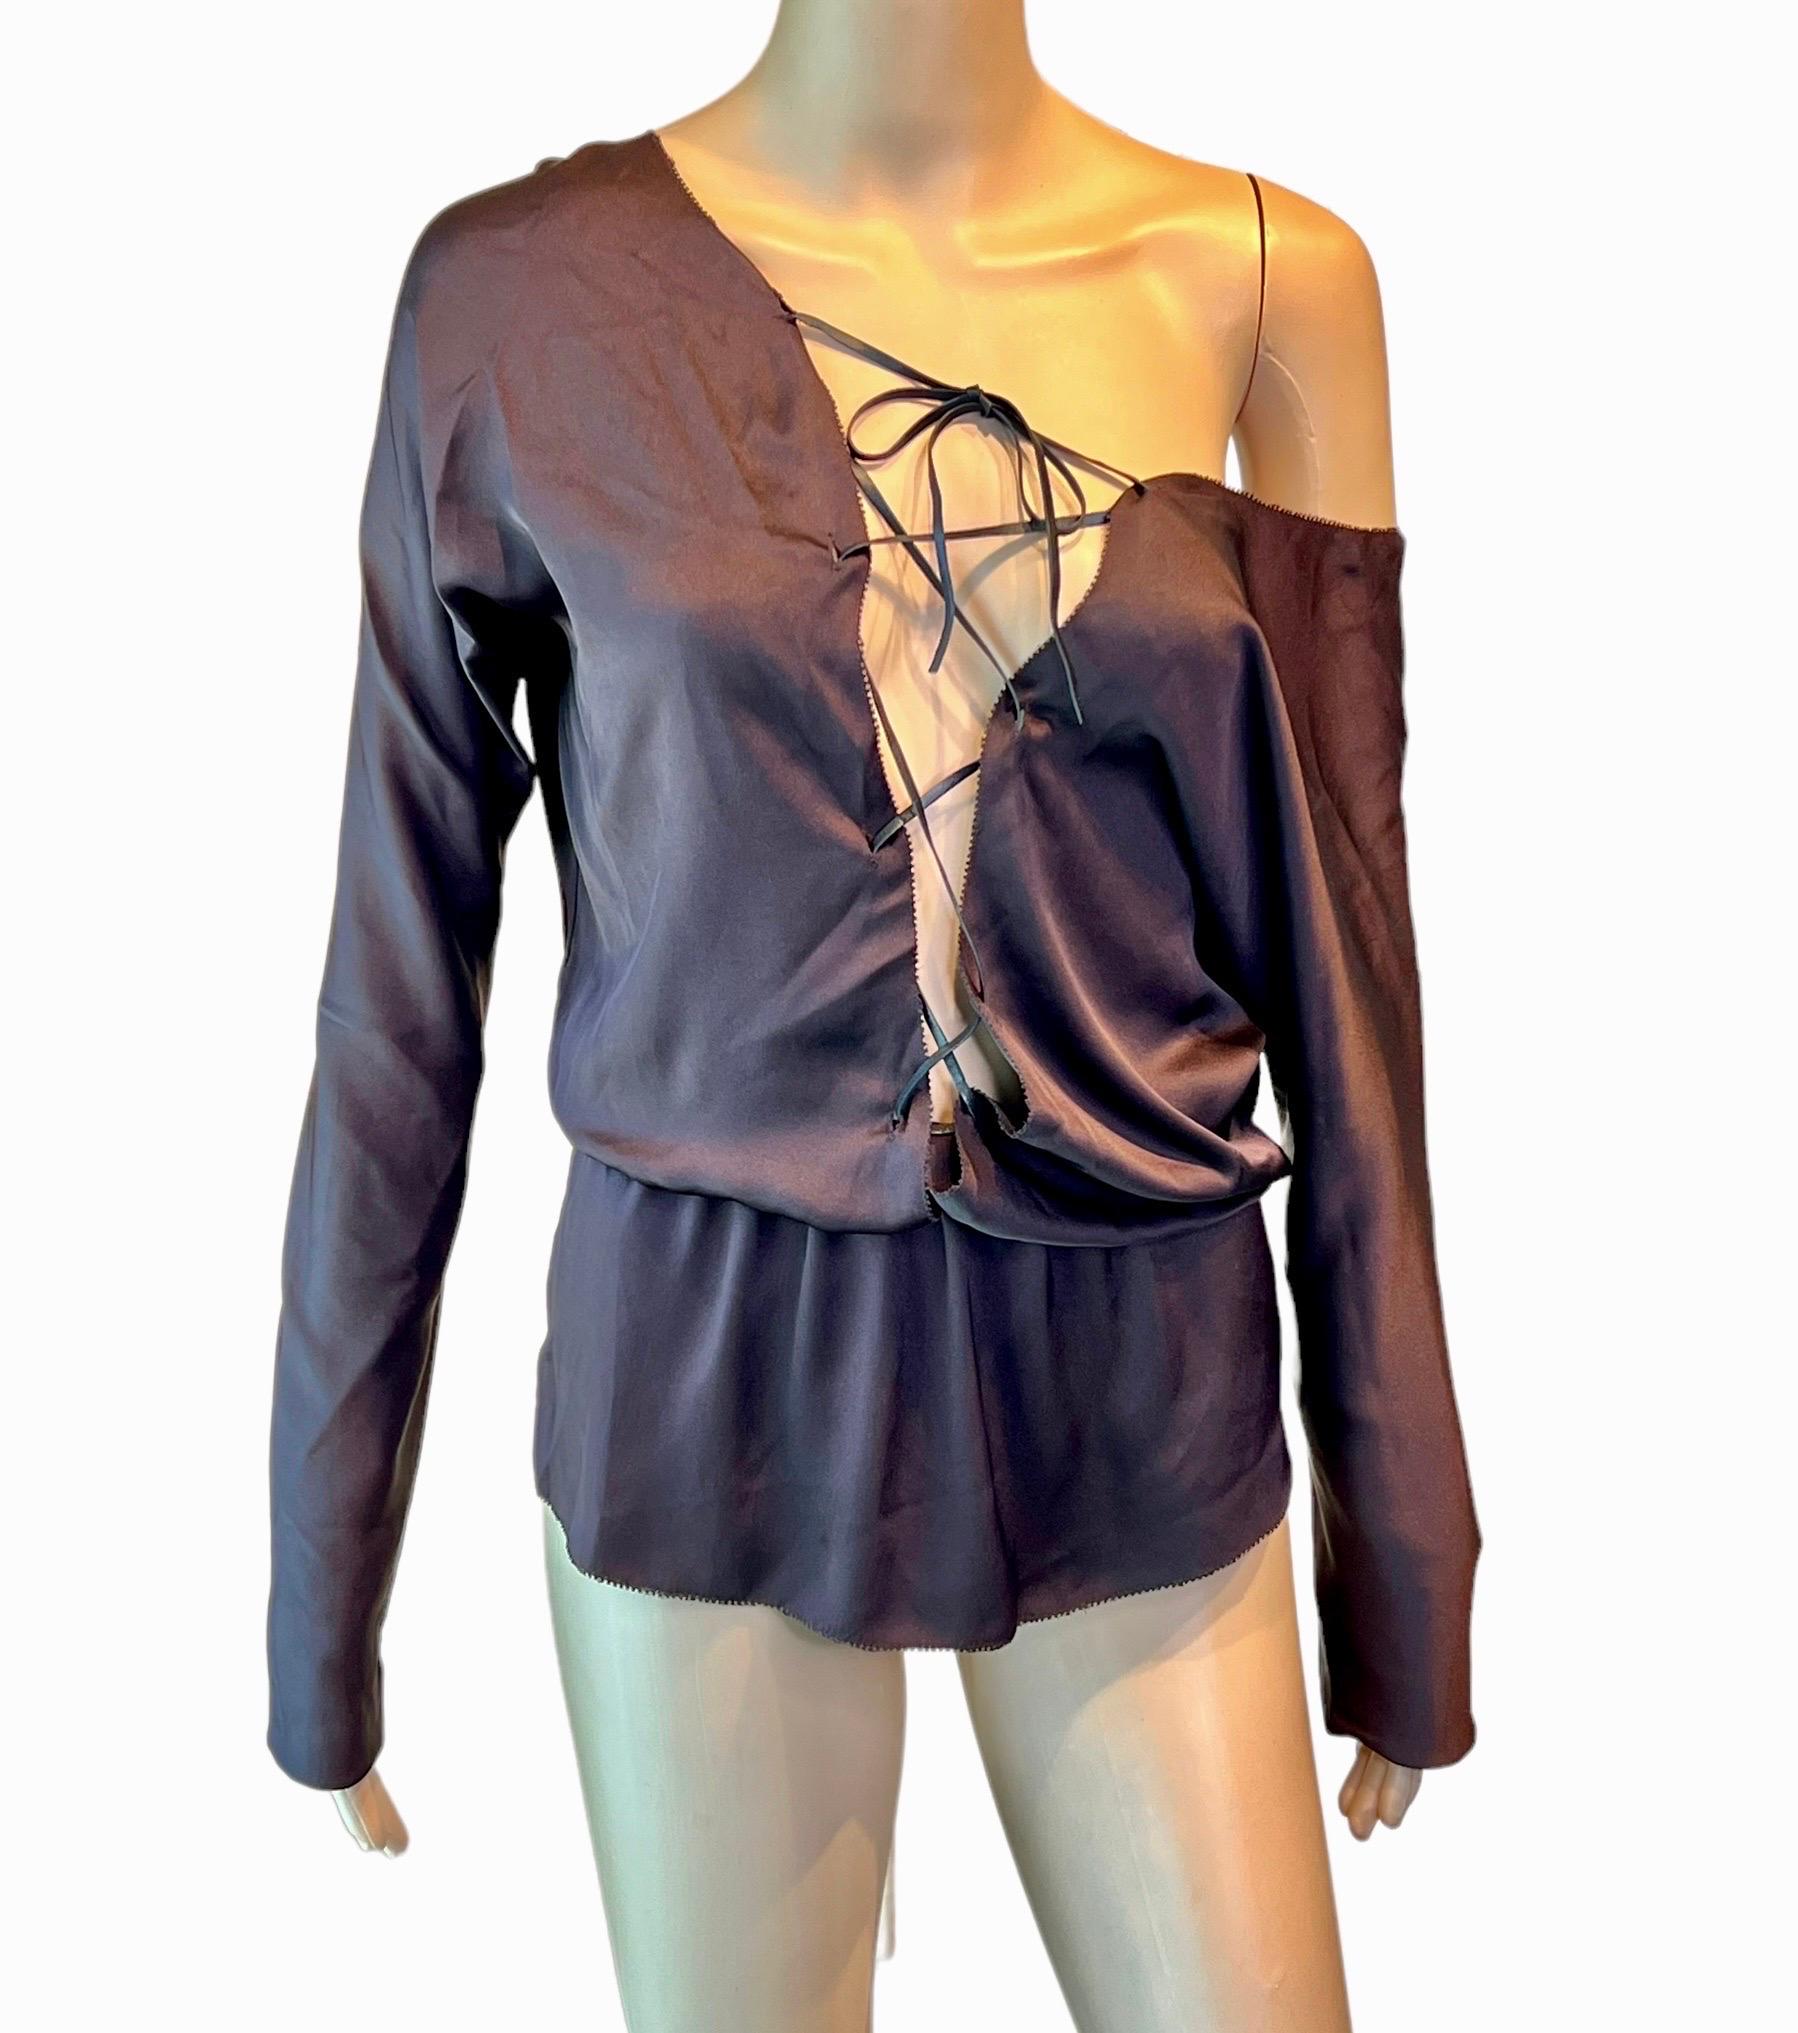 Tom Ford for Gucci F/W 2002 Runway Plunging Silk Lace-Up Brown Blouse Top (chemisier) en vente 2